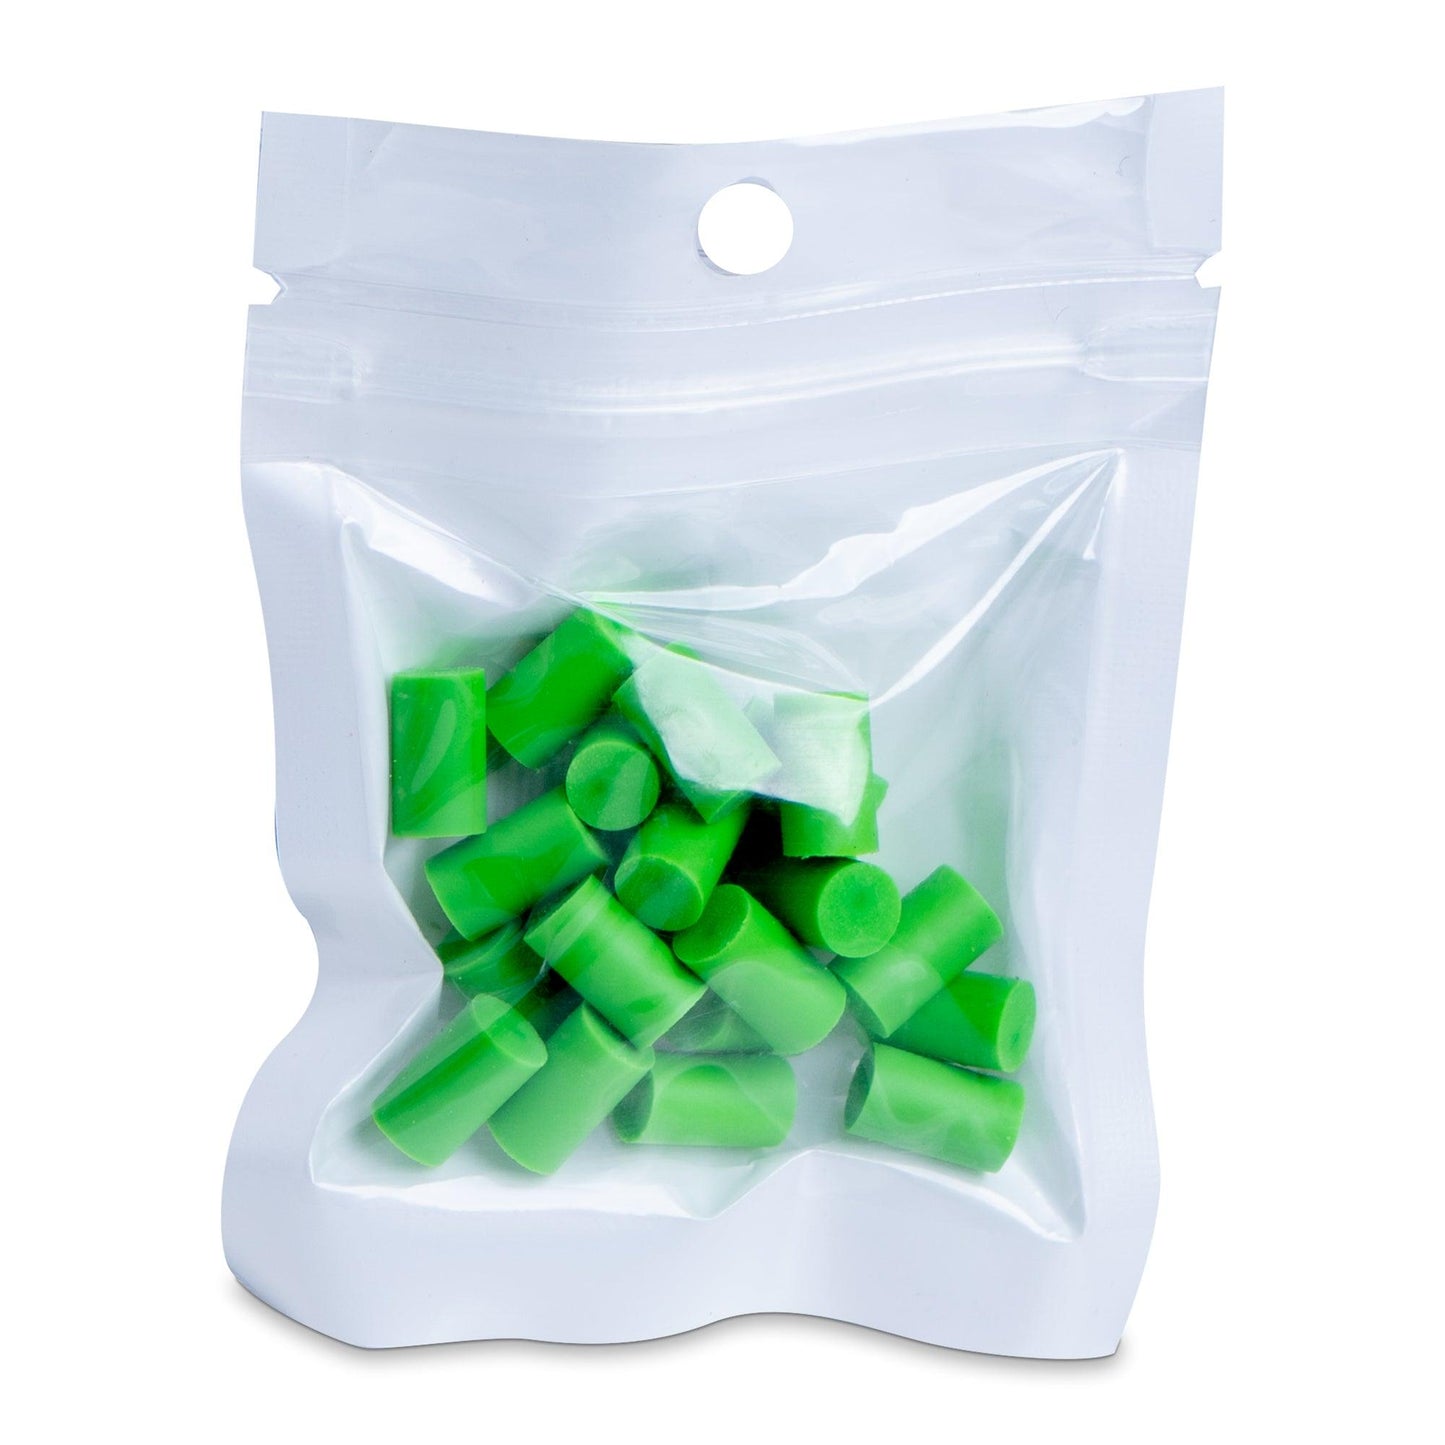 24ct - Green Erasers